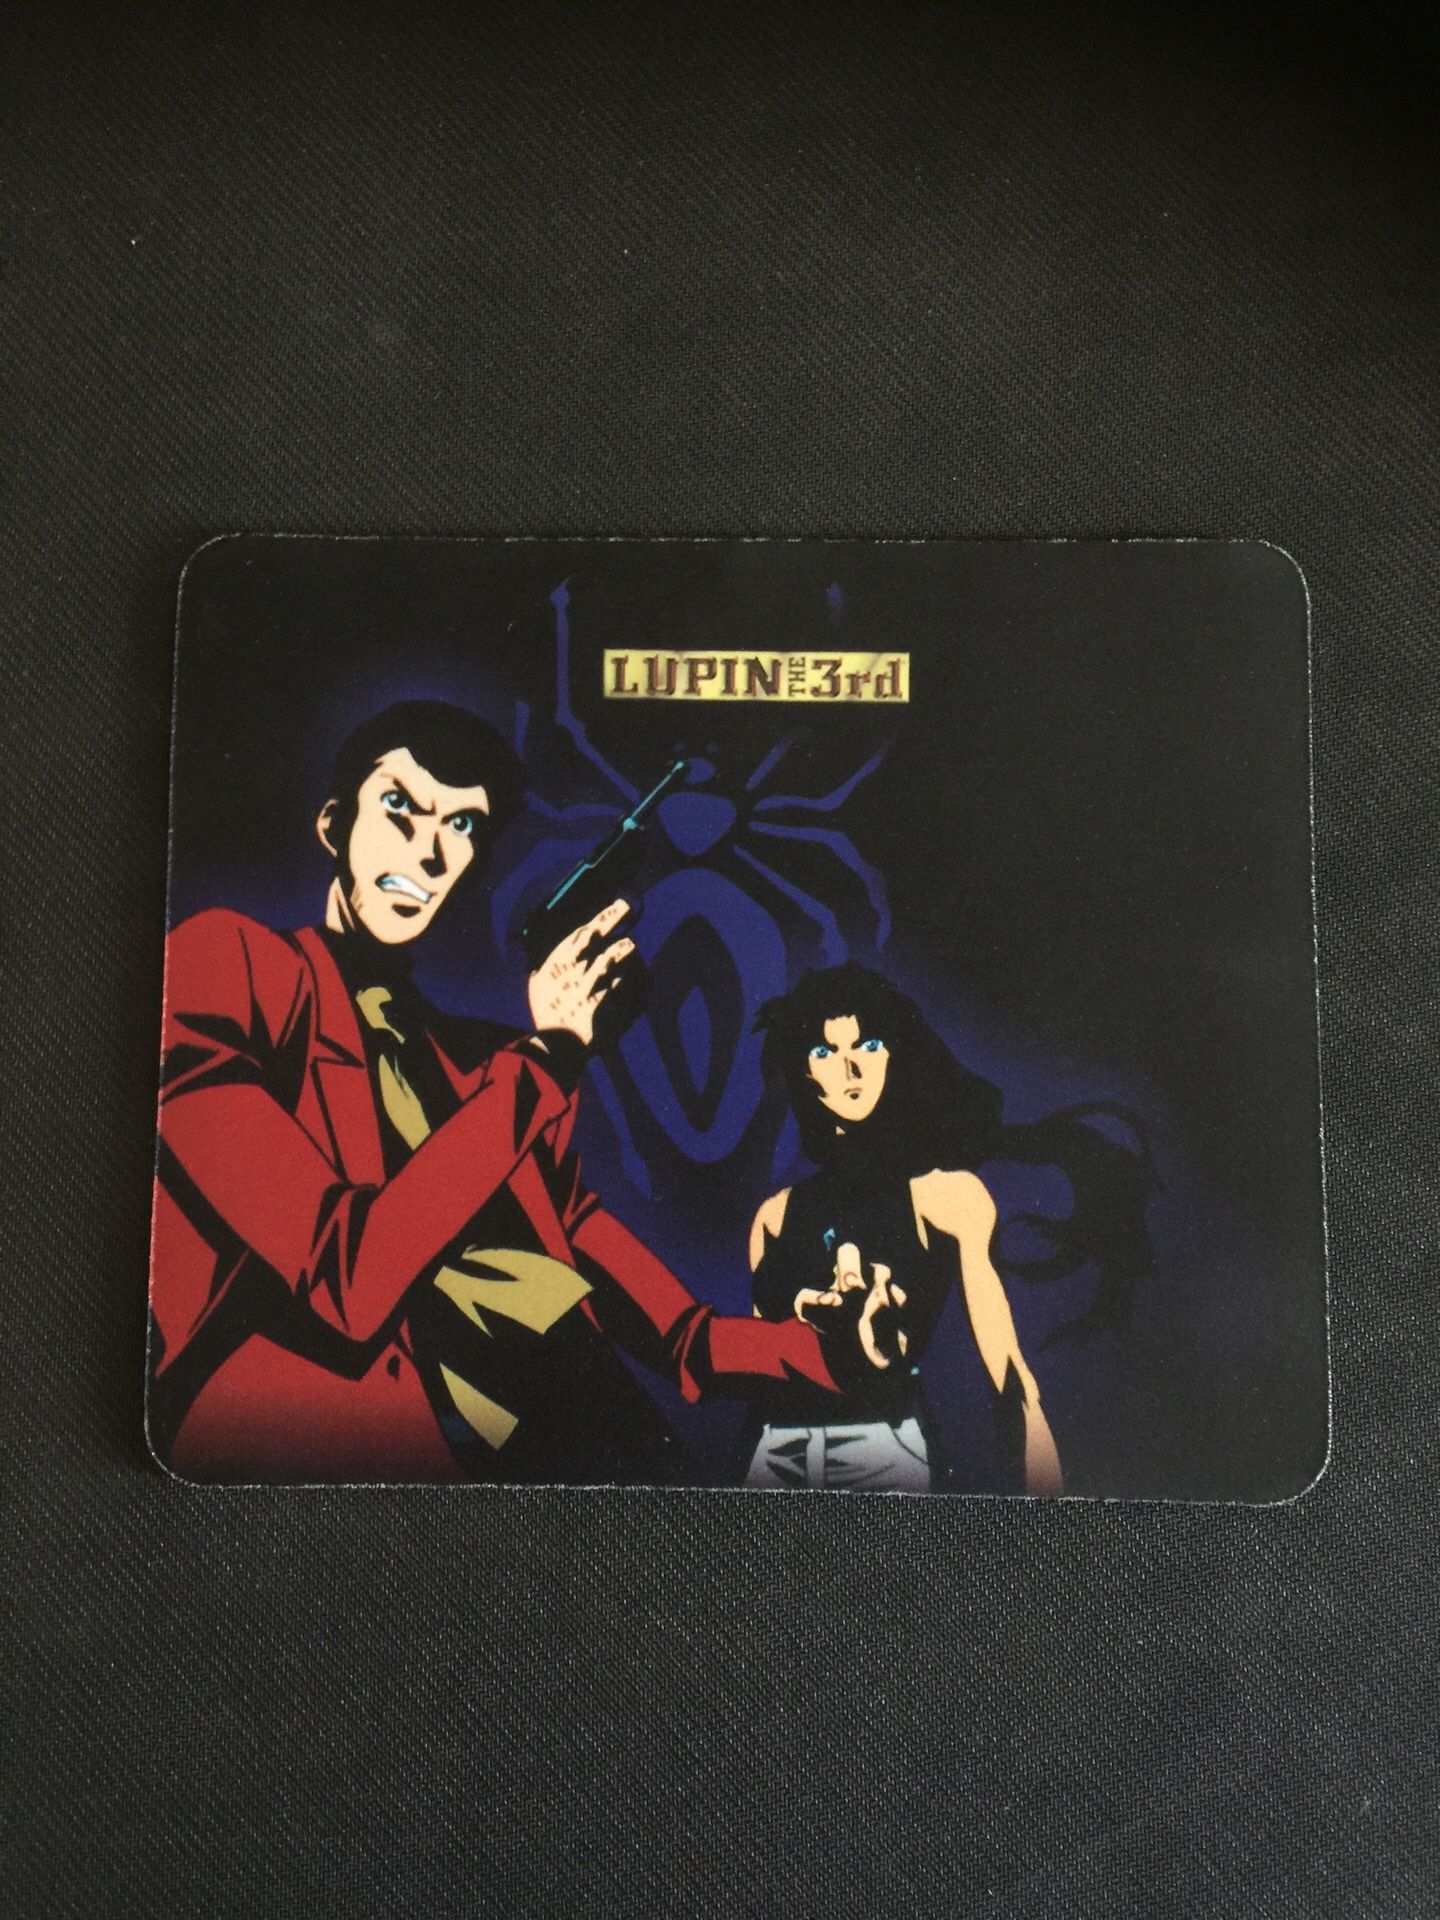 Lupin the 3rd vibrant colorful computer desktop laptop mouse pad